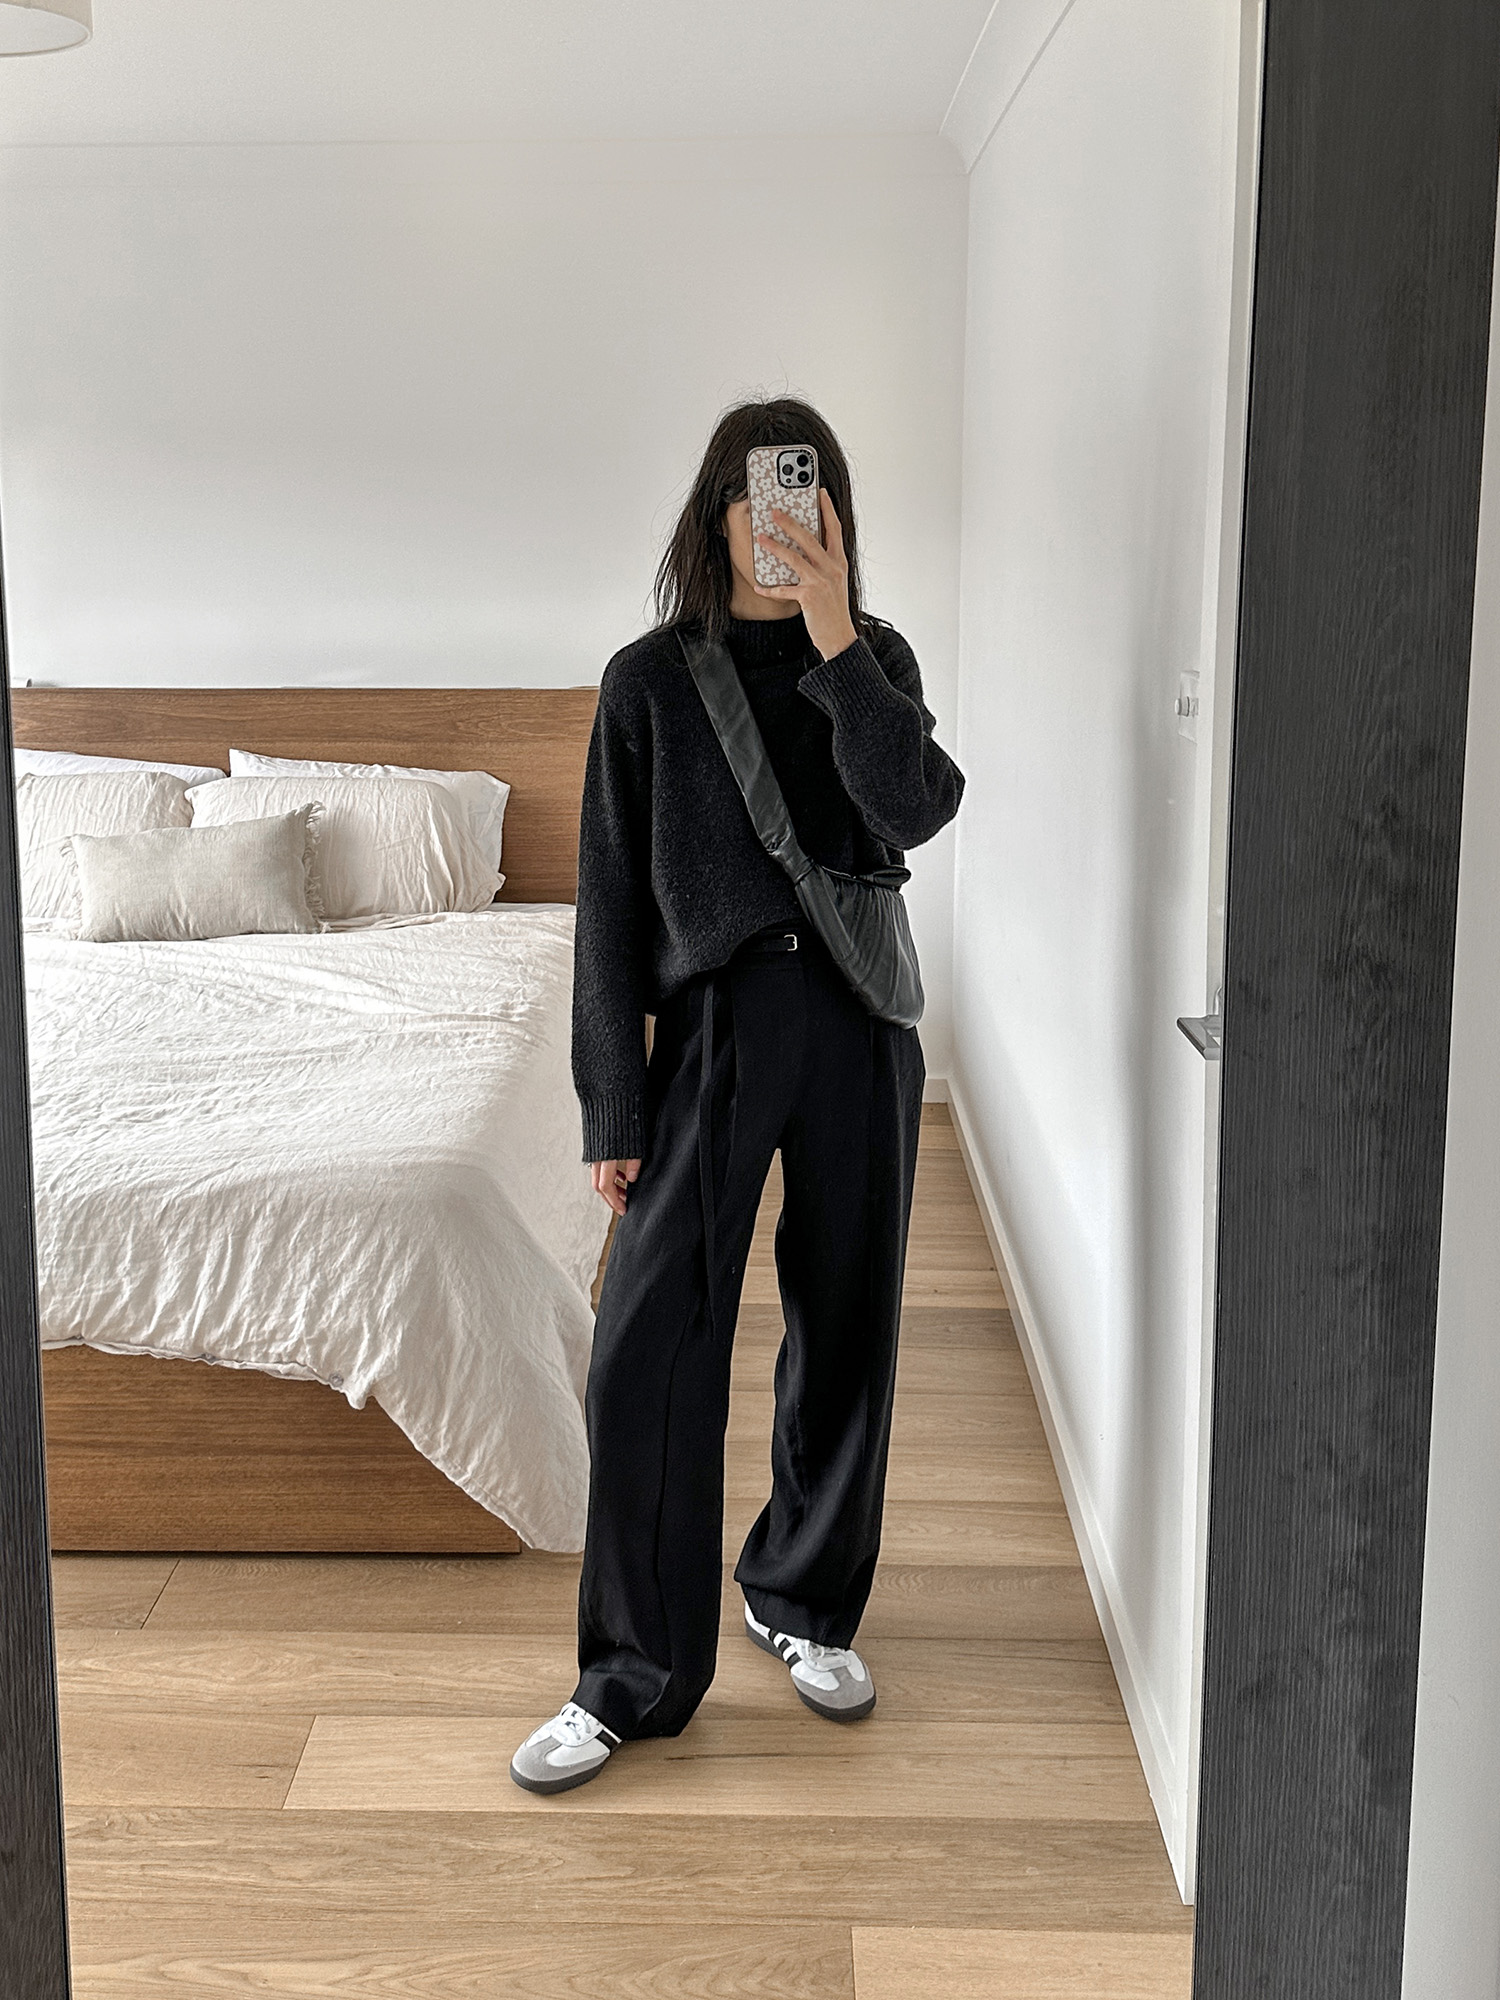 All black outfit wearing Lemaire croissant bag